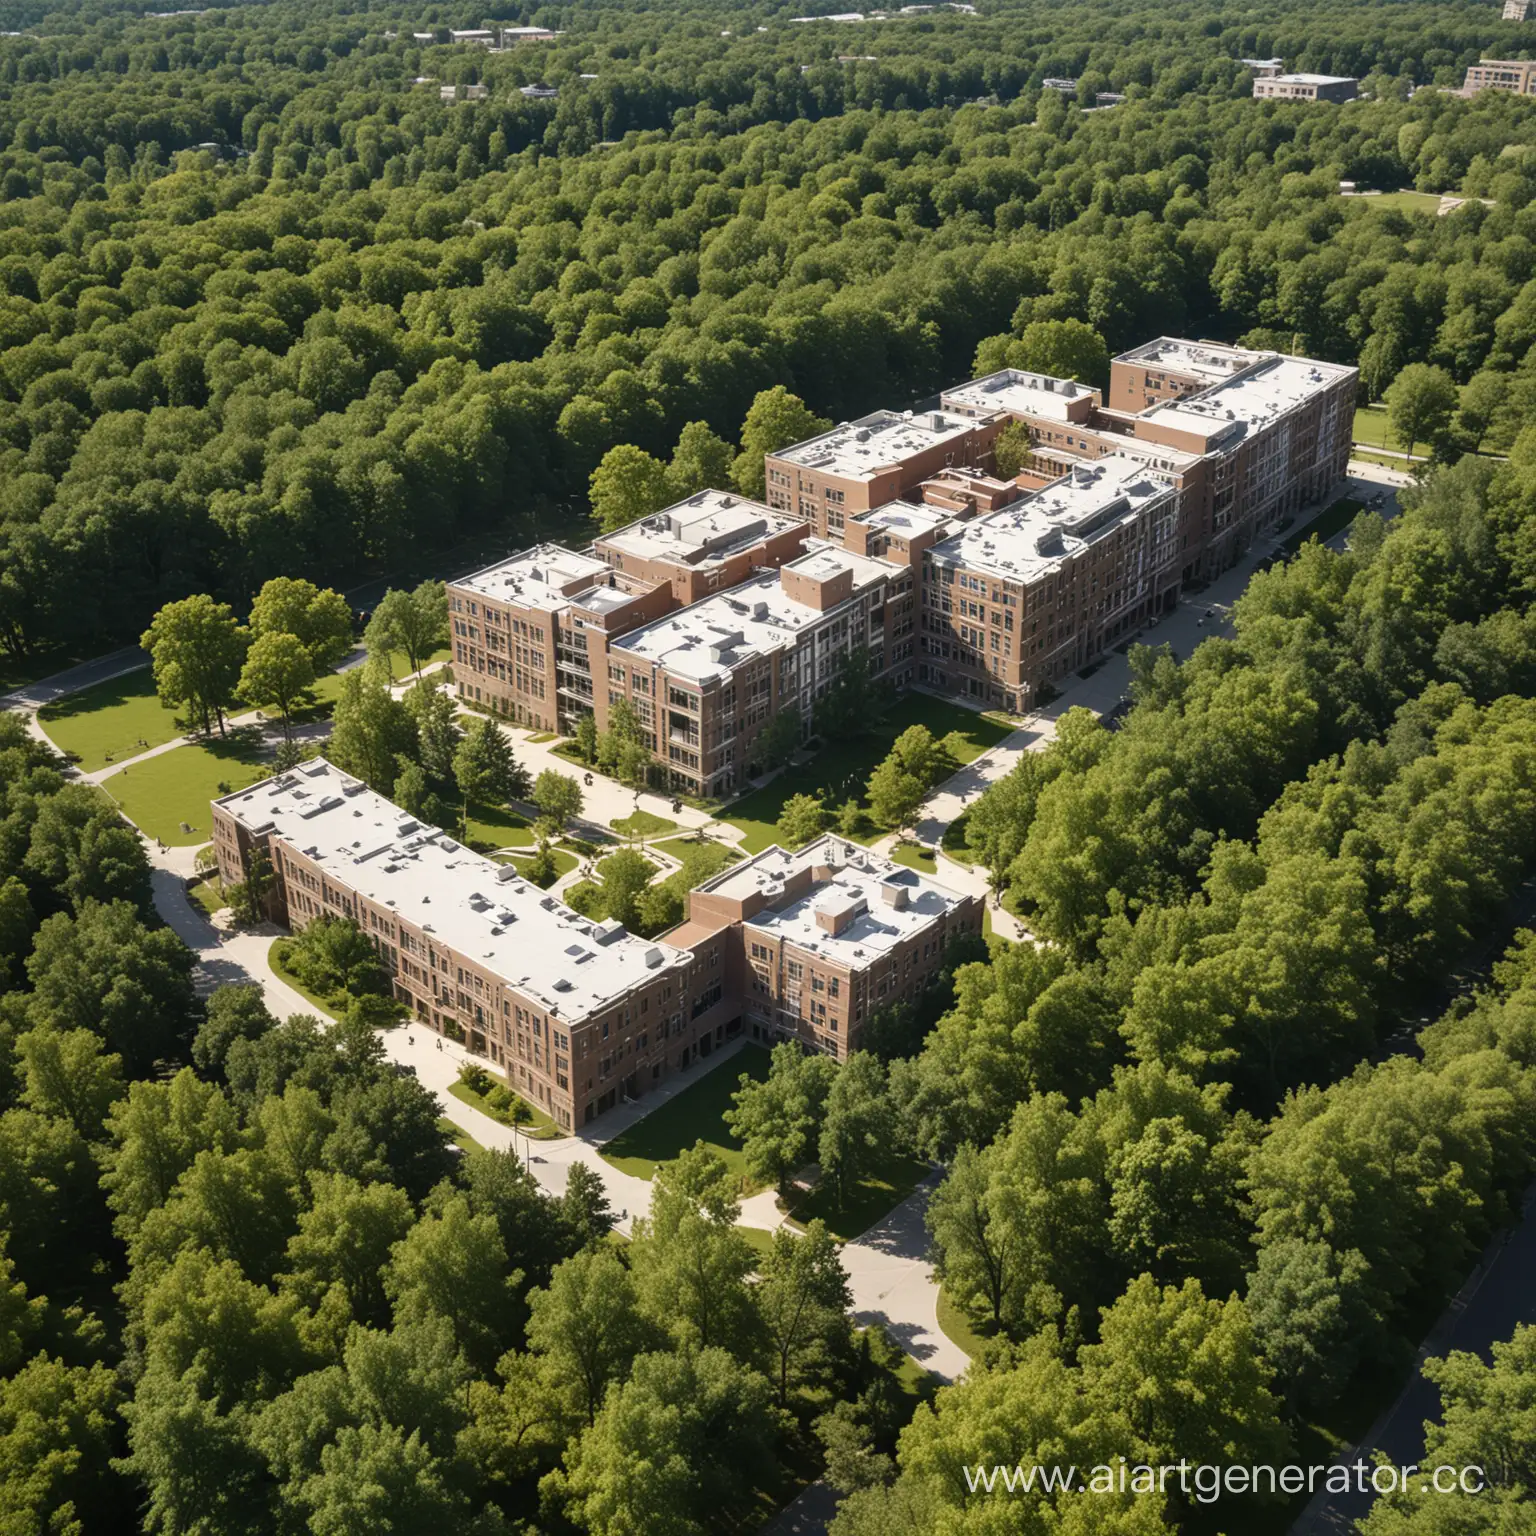 Vibrant-Summer-Campus-Academic-Building-and-Dormitory-Nestled-Among-Lush-Trees